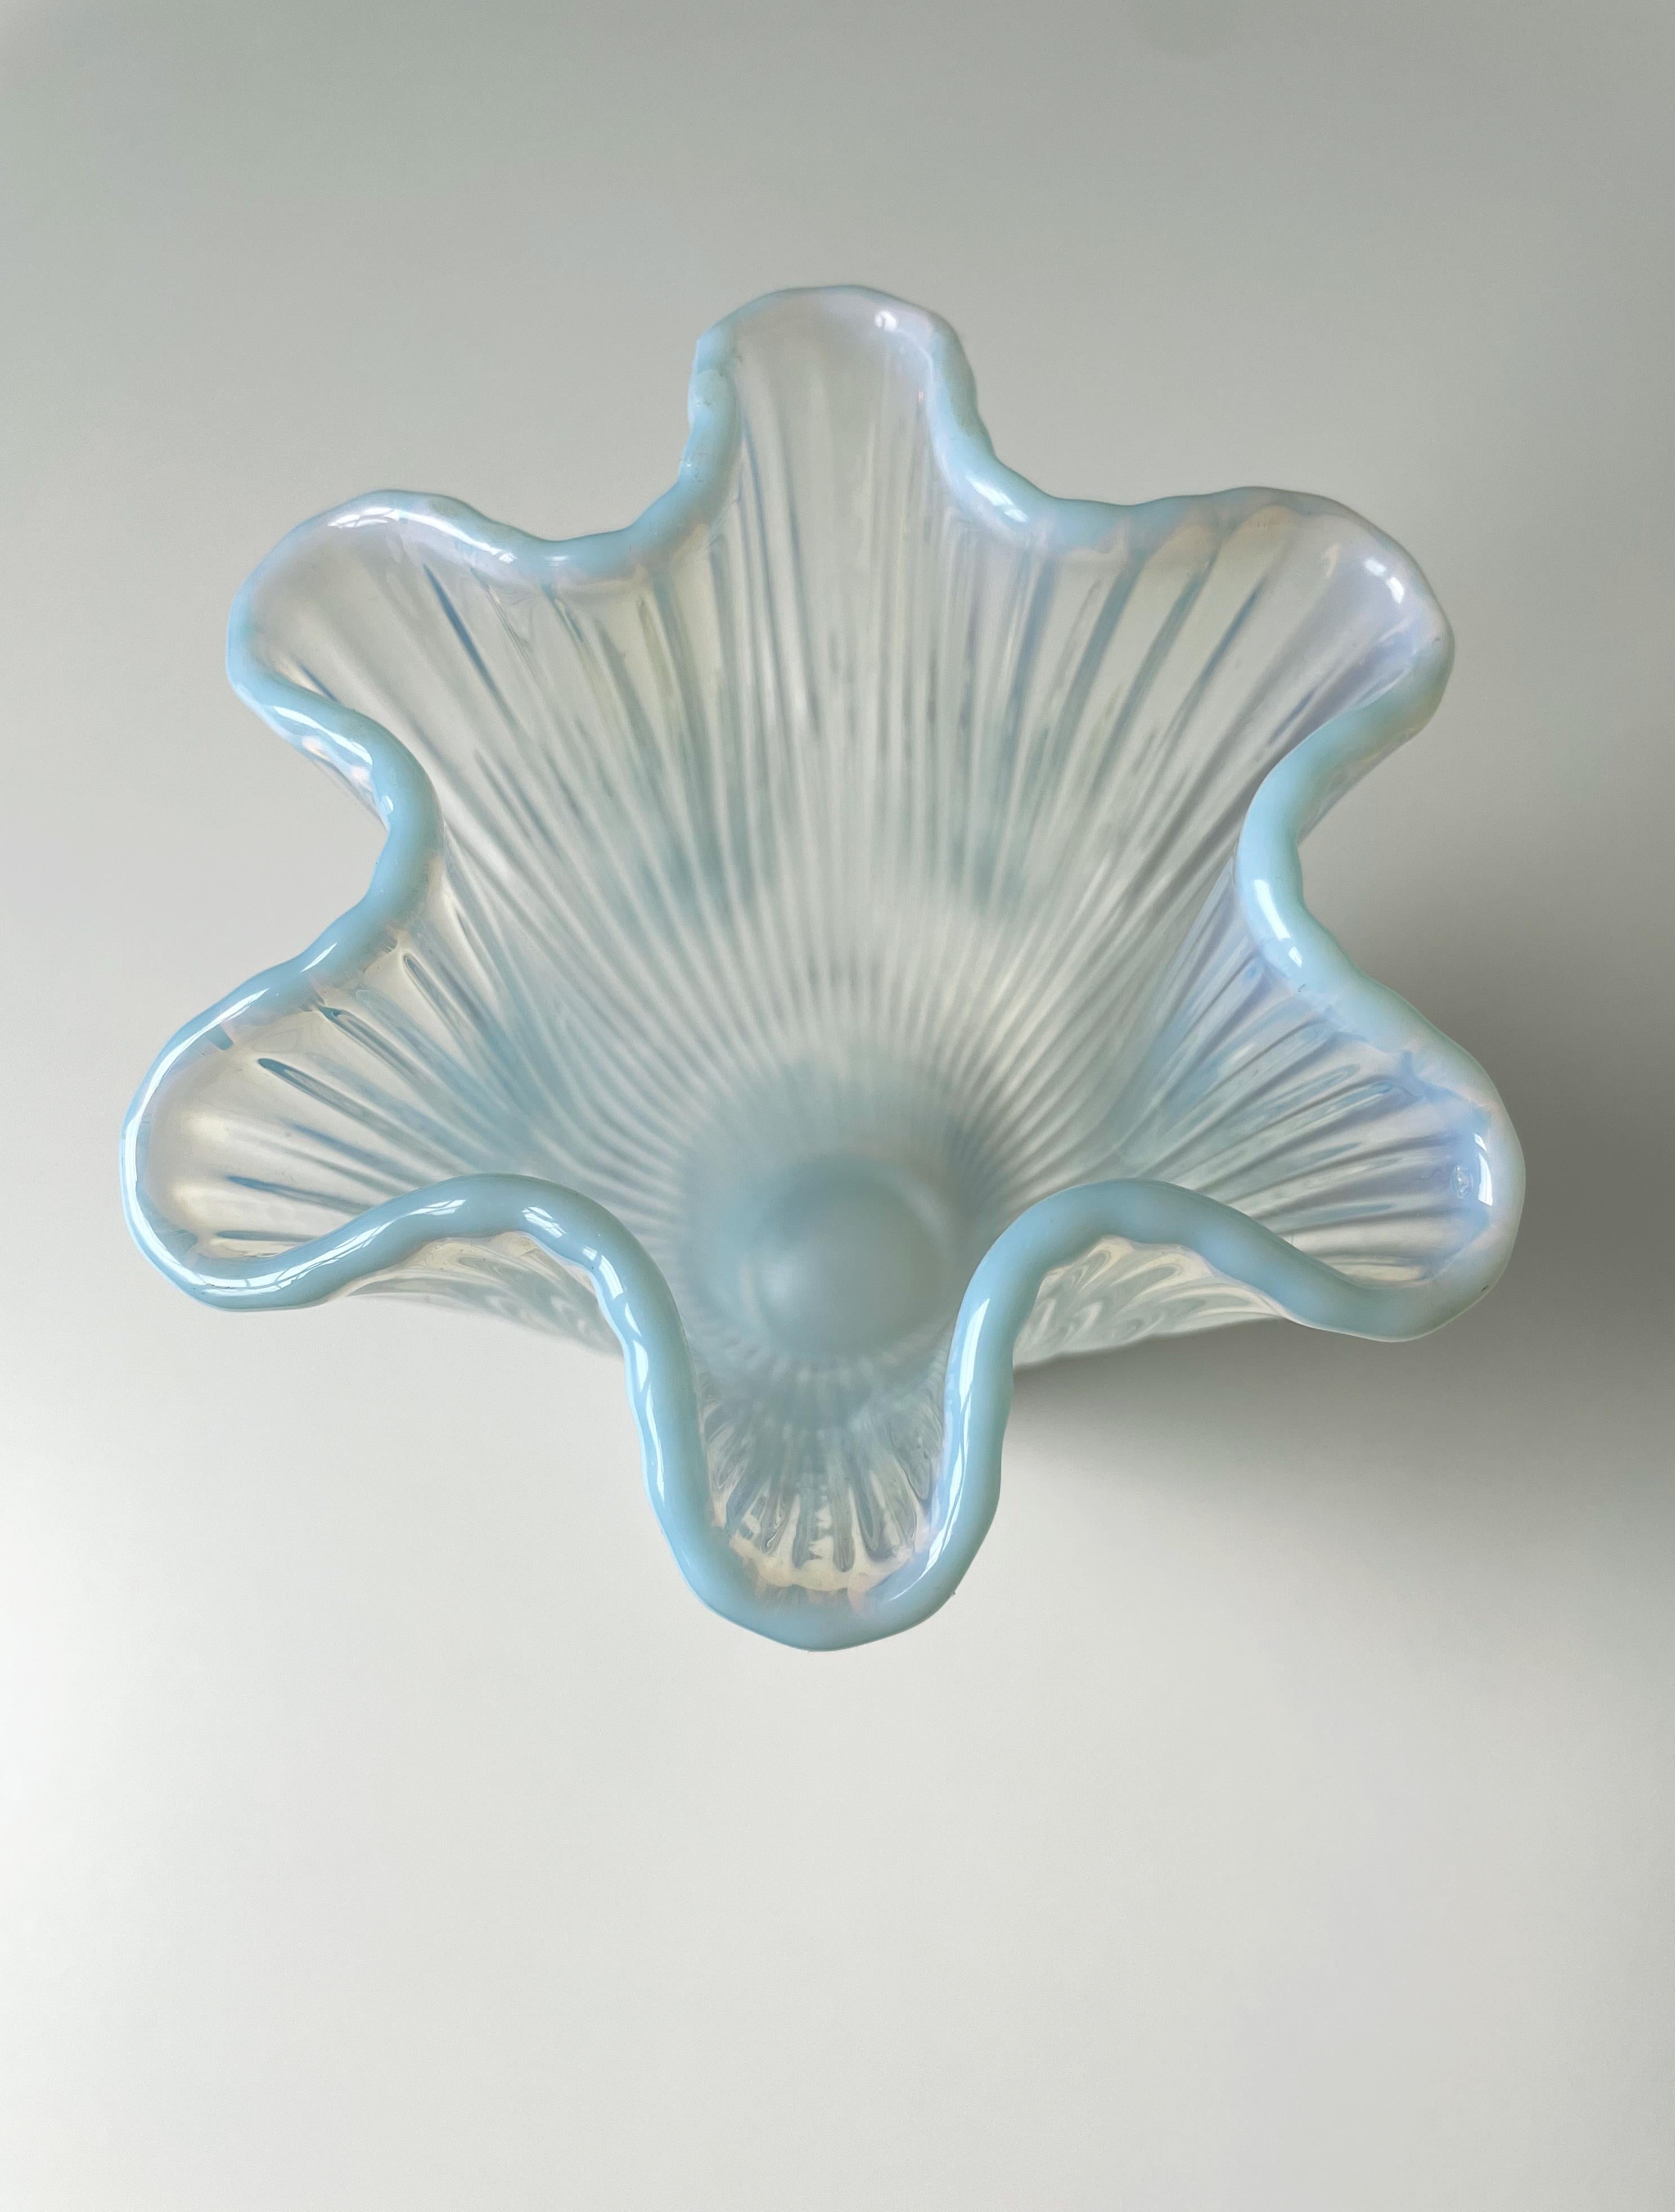 Delicate and exquisite mouthblown Swedish art glass vase designed by Arthur Percy for Gullaskrufs Glasbruk in 1952. White and light blue opalescent glass constitutes this graceful vase with the name Reffla (Swedish for grooves) - the model is